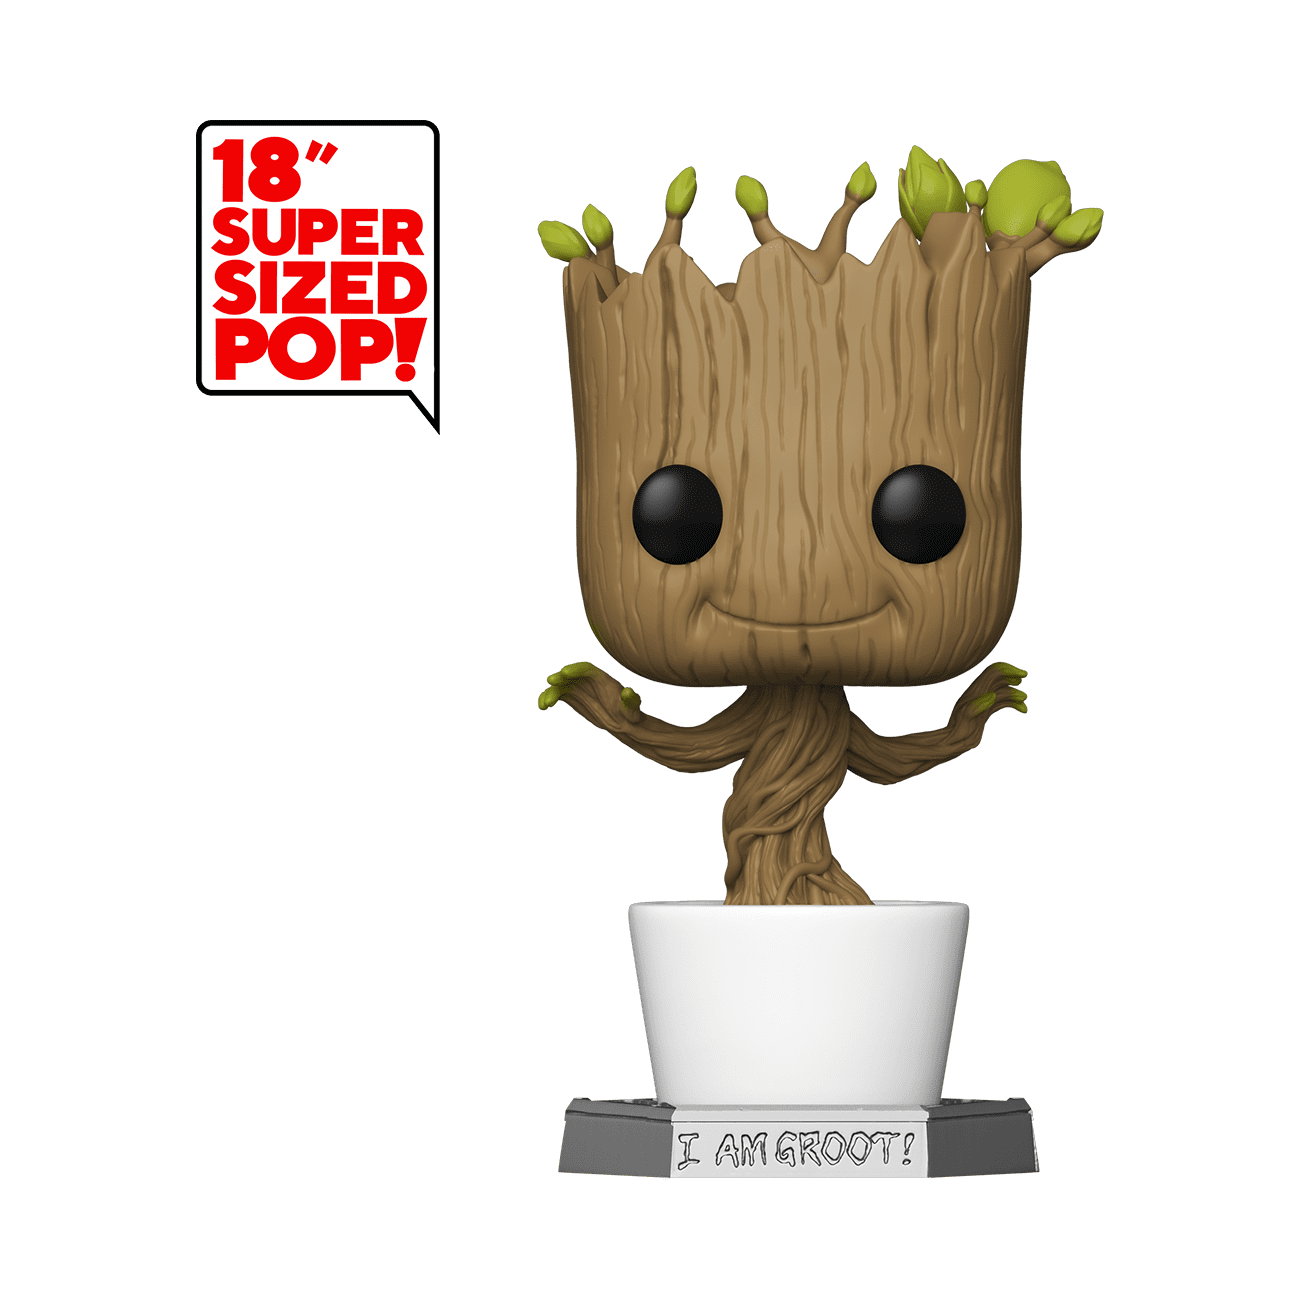 Dancing Groot #65 (Guardians of the Galaxy) POP! Marvel by Funko